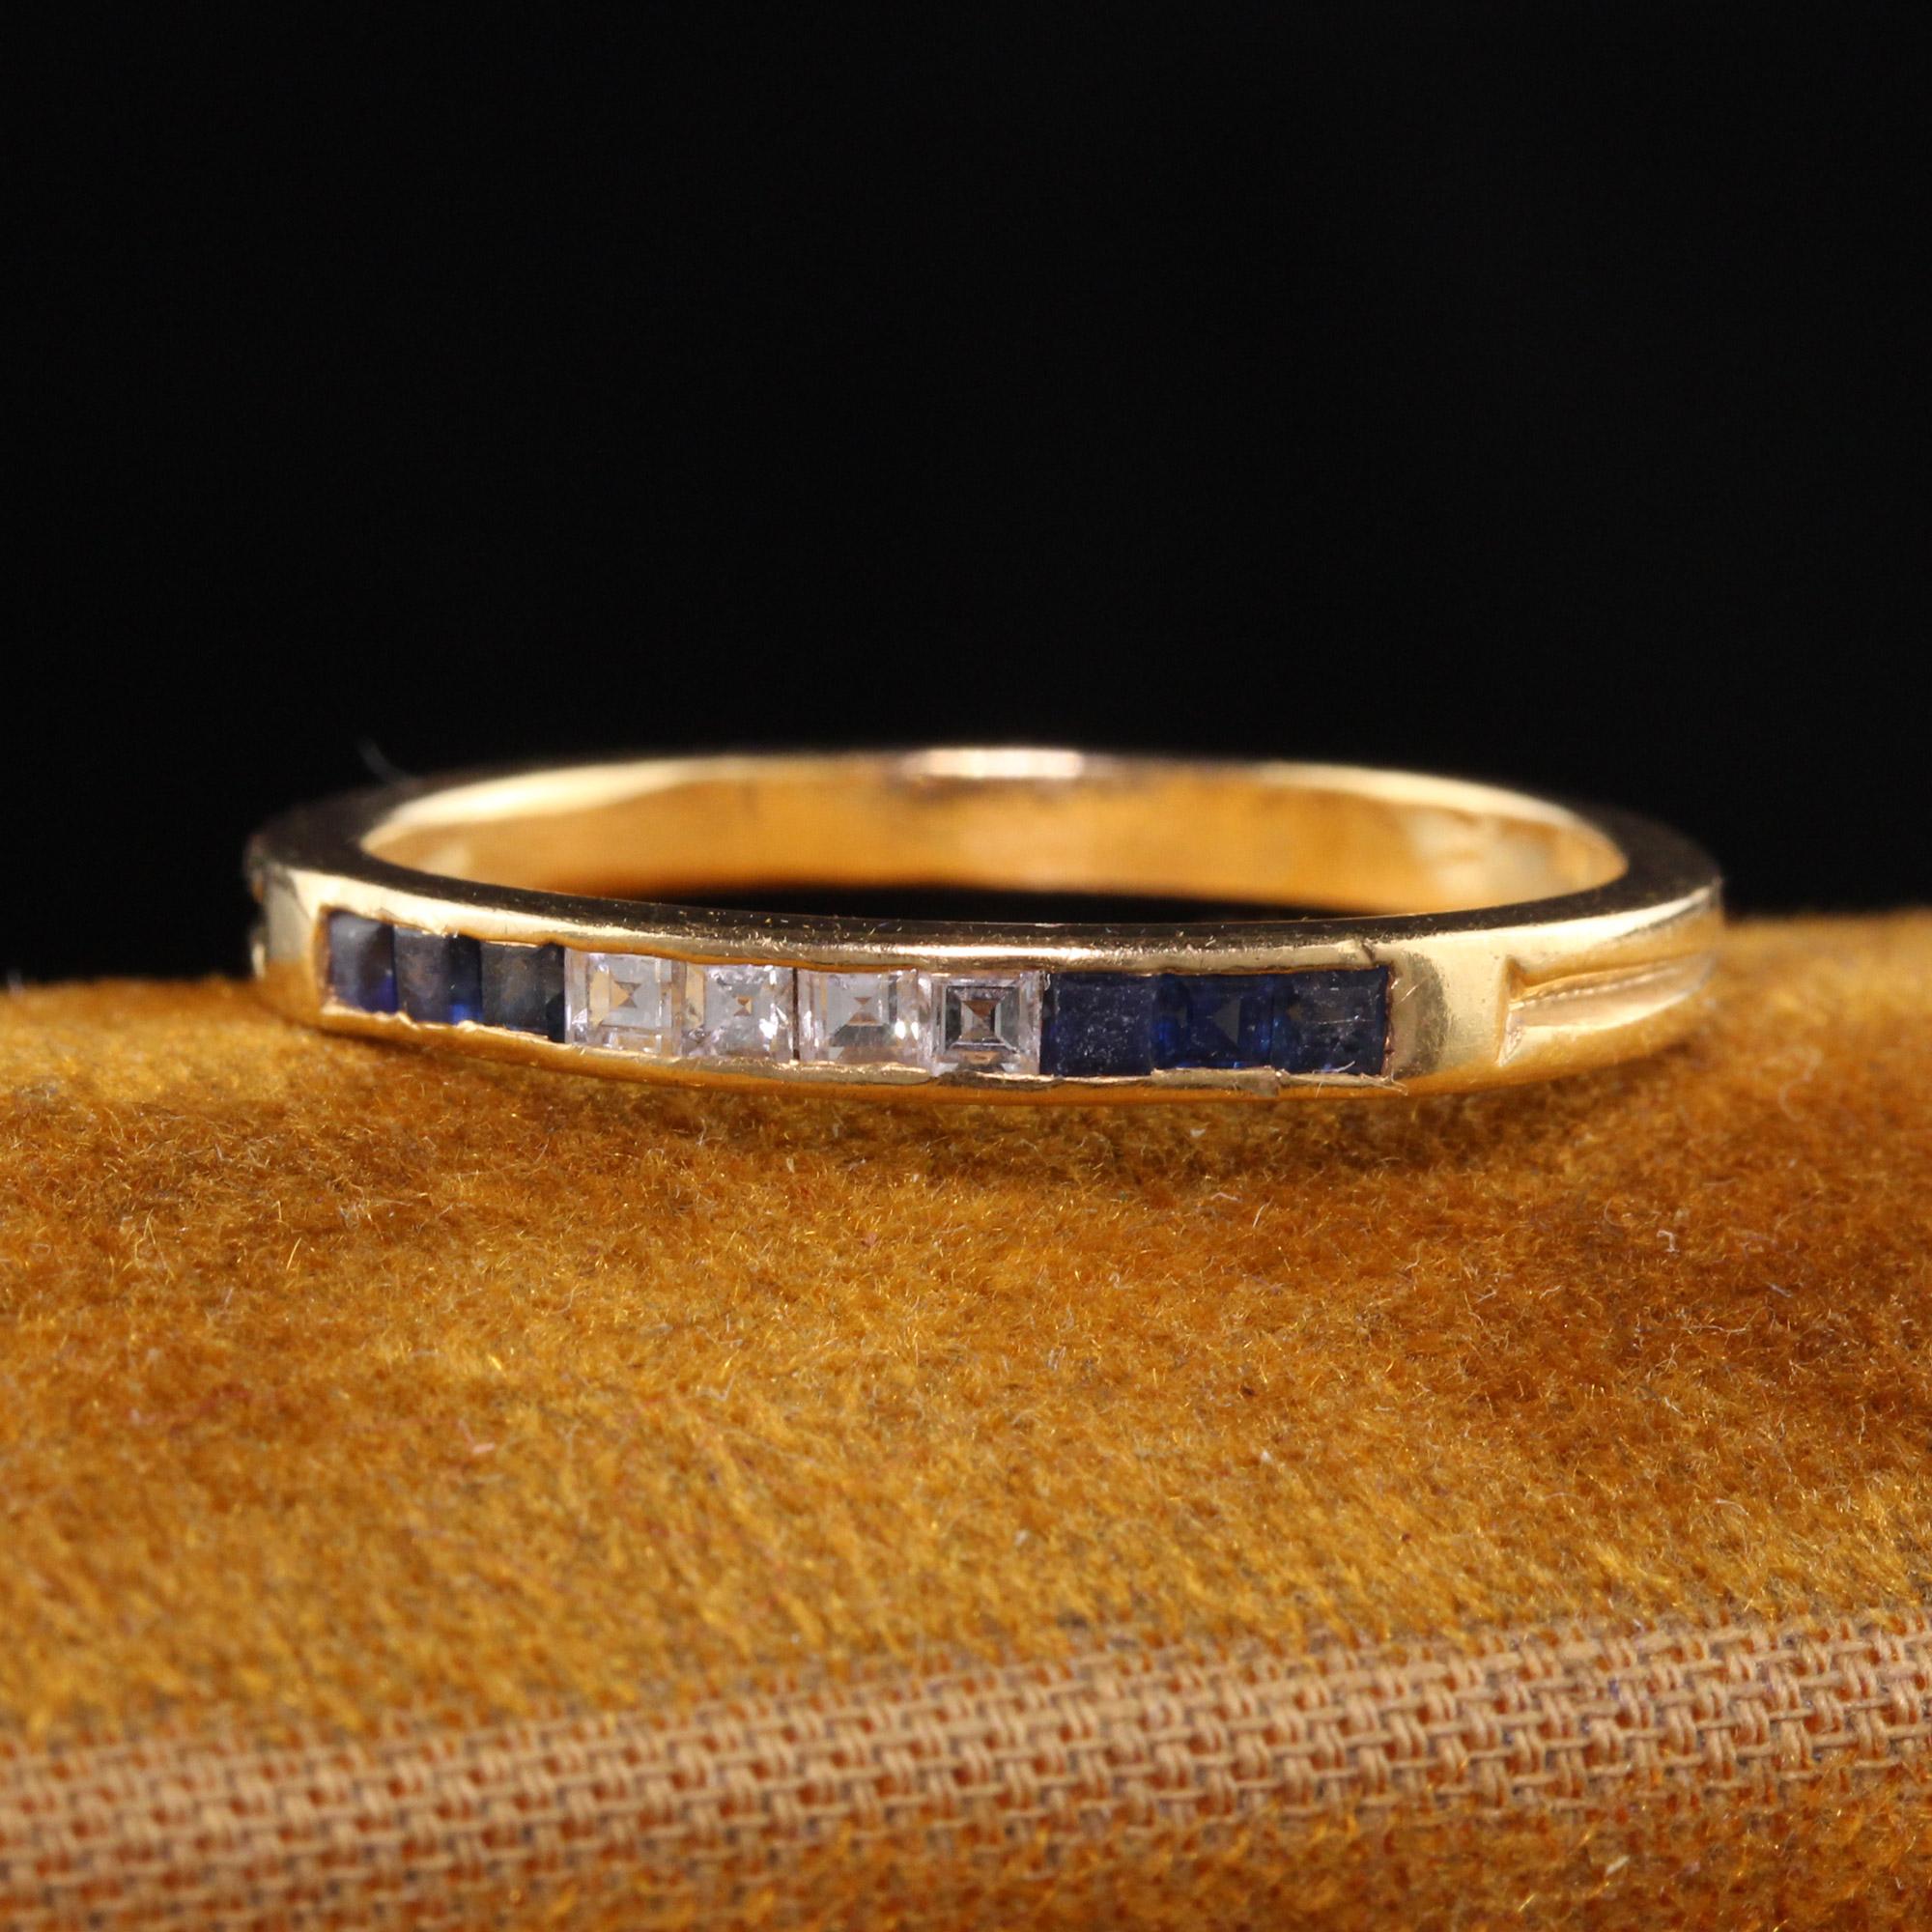 Beautiful Antique Art Deco Tiffany and Co 18K Yellow Gold Sapphire Carre Cut Diamond Band.This beautiful Tiffany and Co wedding band has sapphires and carre cut diamonds set on the top in an 18K yellow gold band. It's a classic style with very